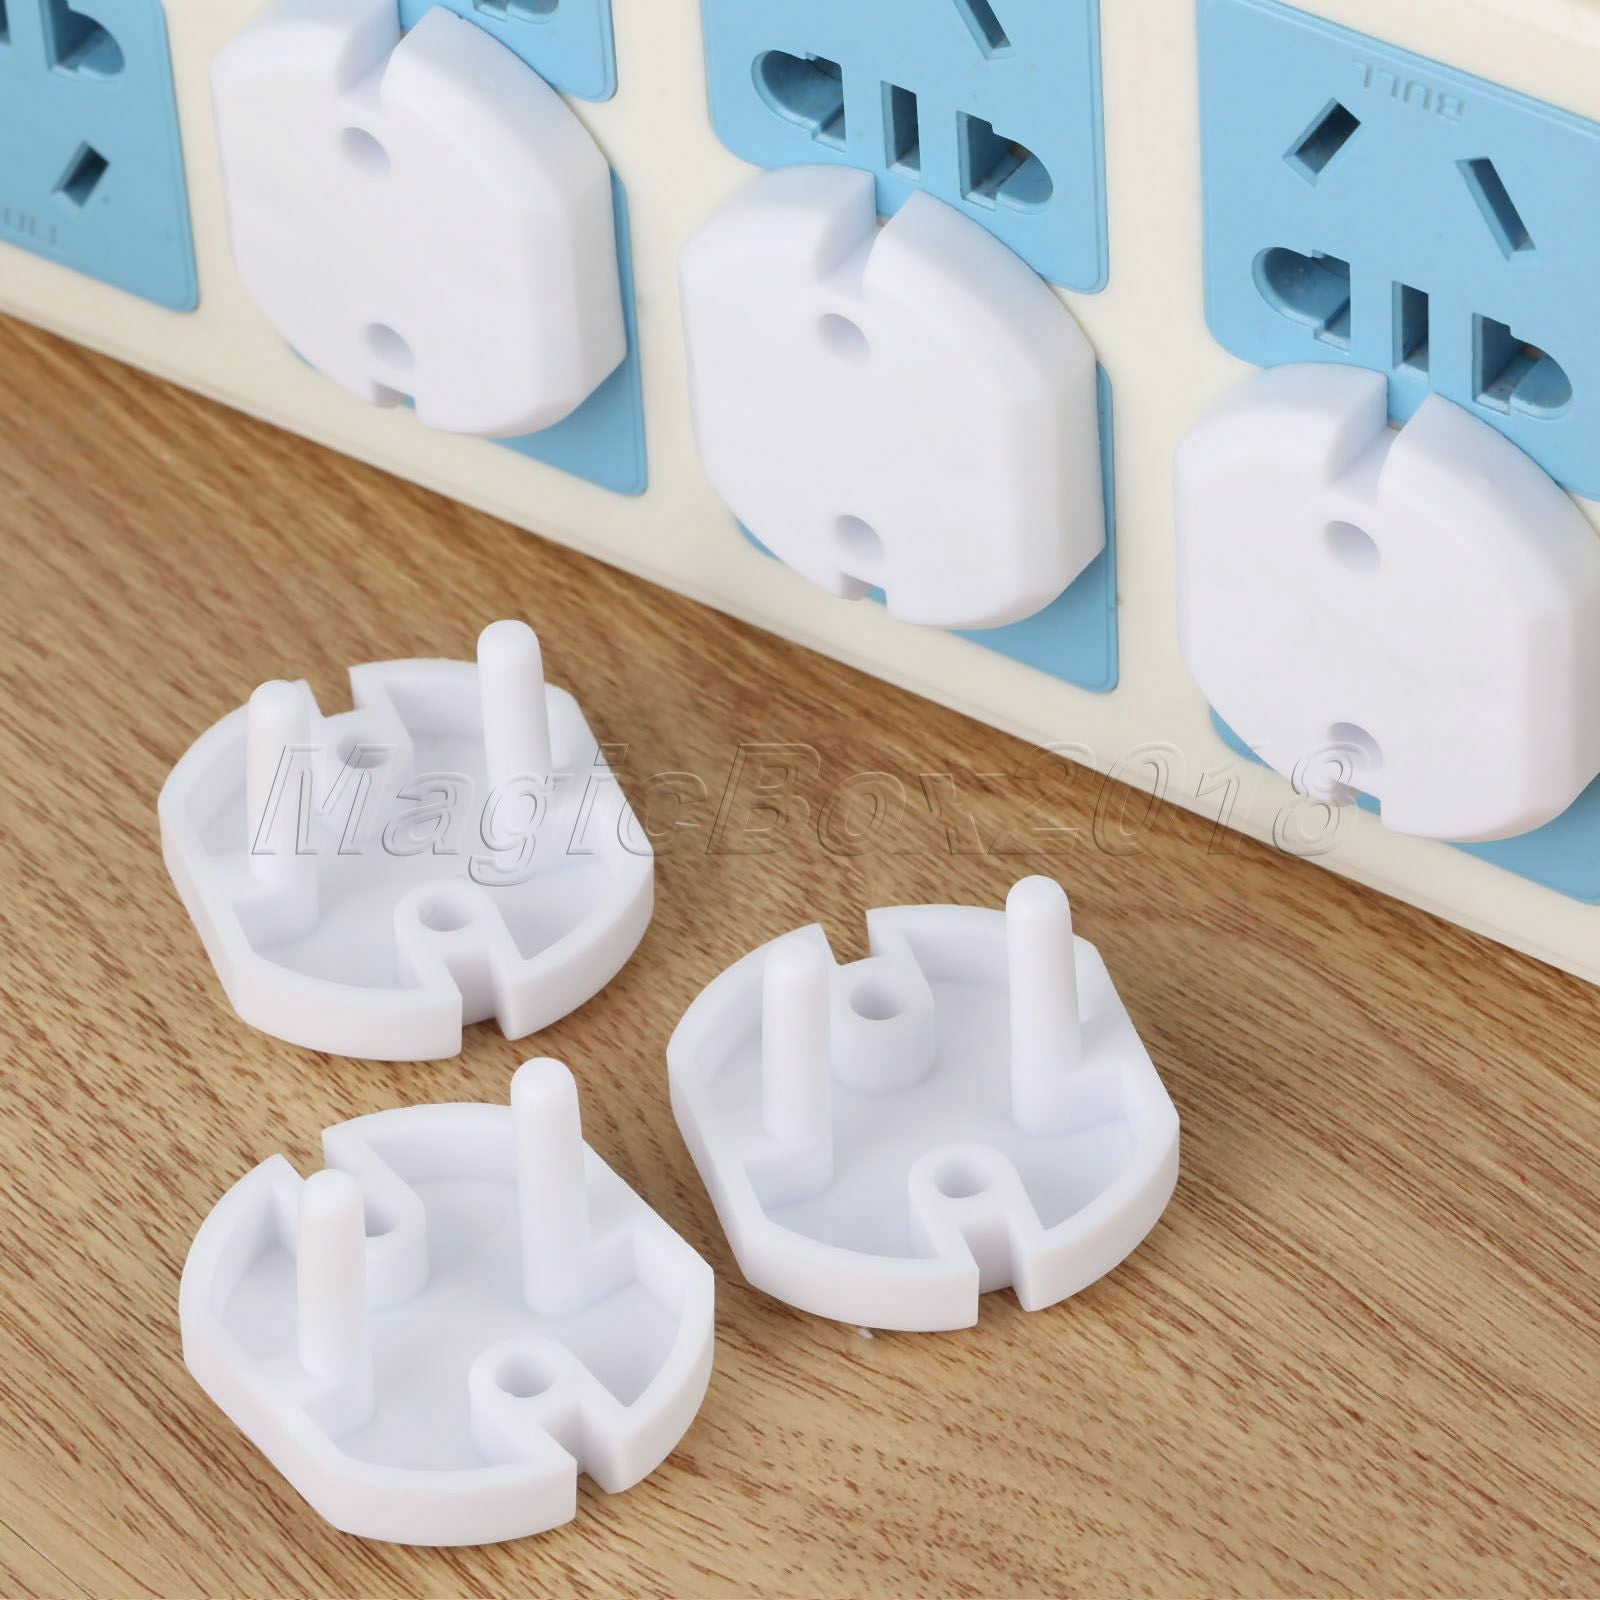 10pcs EU Plug Socket Cover Baby Proof Child Safety Protector Guard Electrical